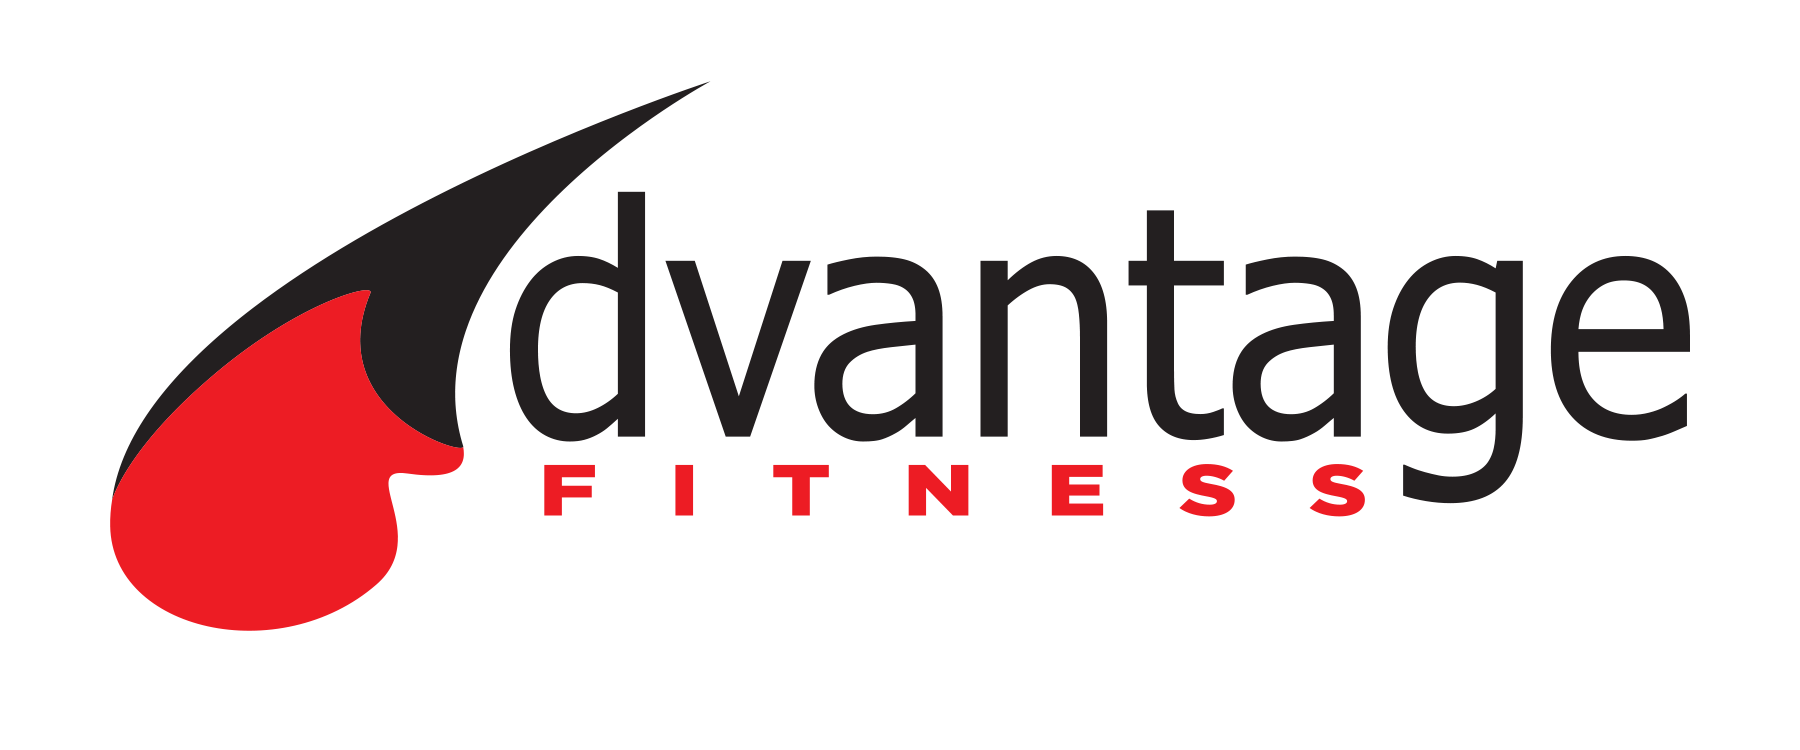 Advantage Fitness - Infofit - Personal Trainer Certification